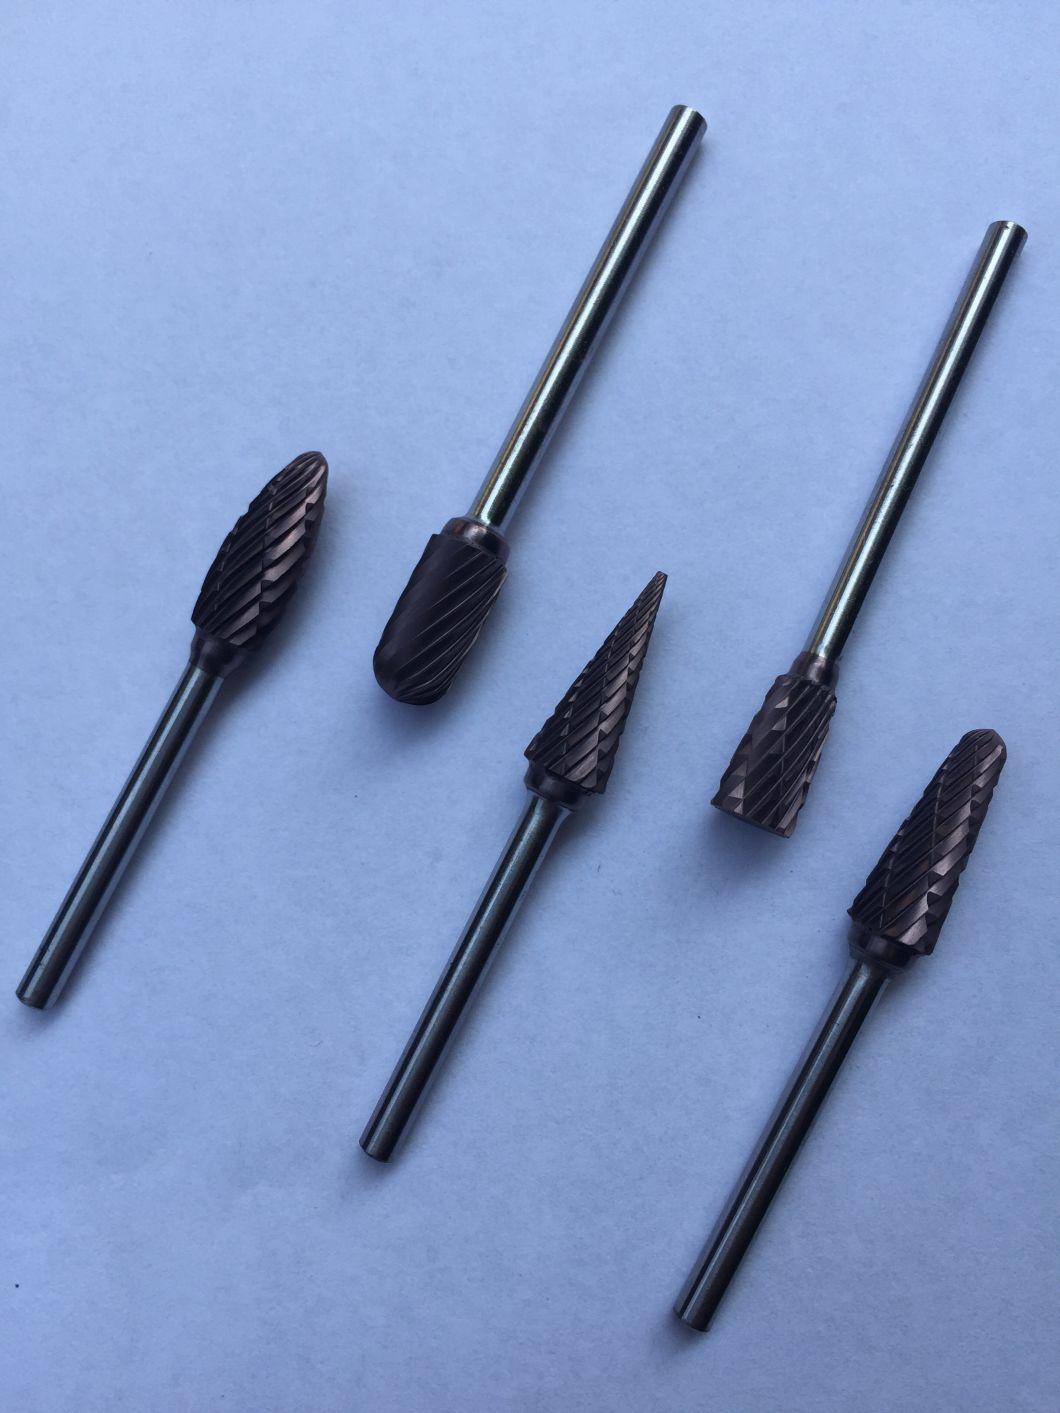 Carbide bur sets with different combinations